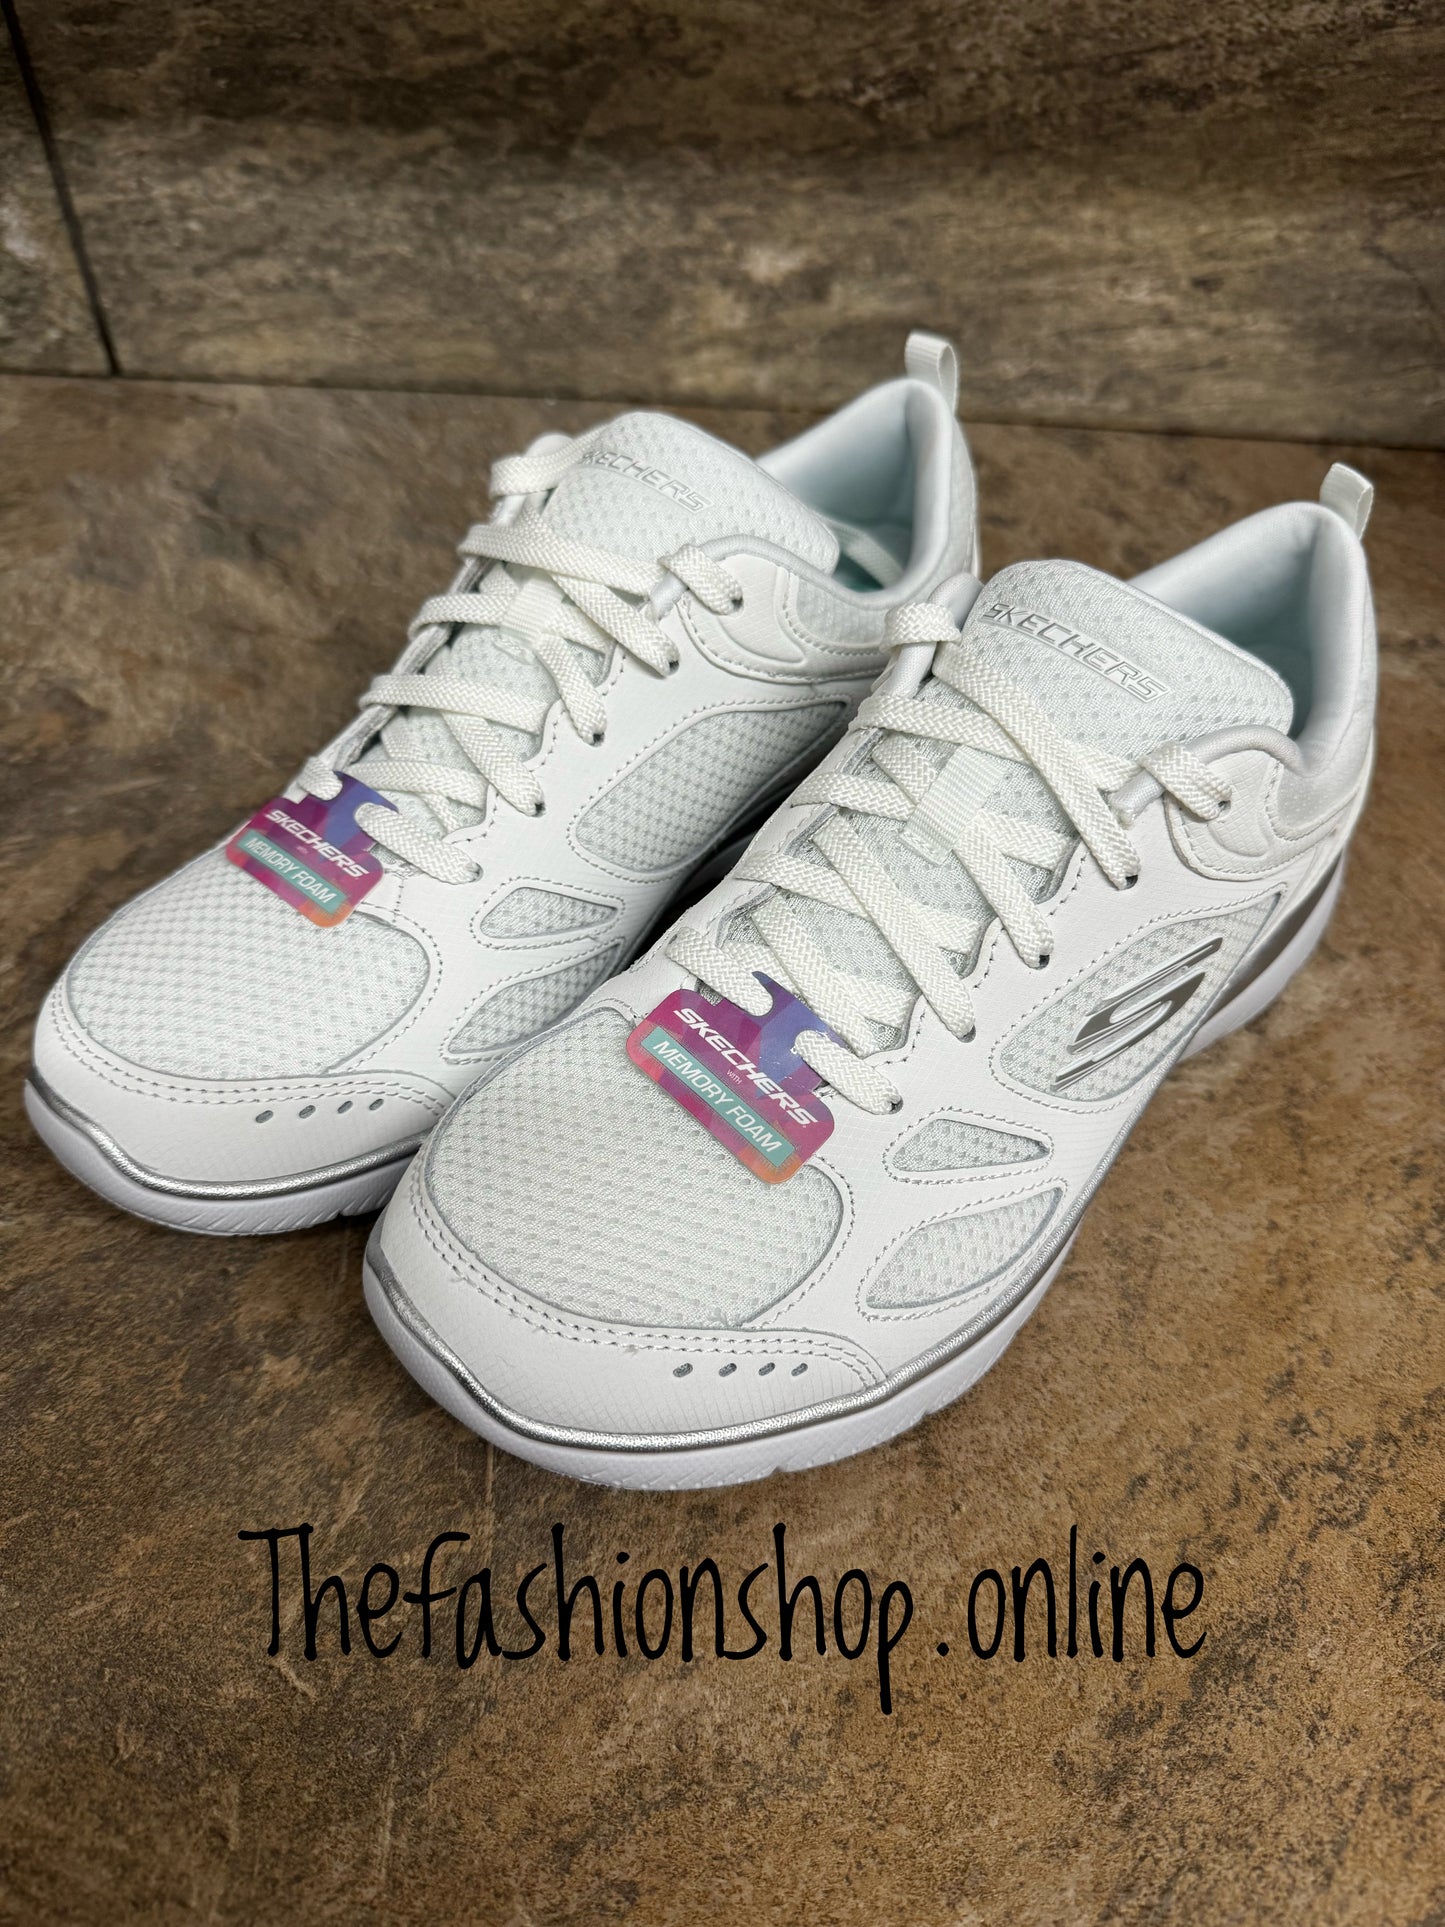 Skechers white and silver Summits Suited trainers sizes 4-8